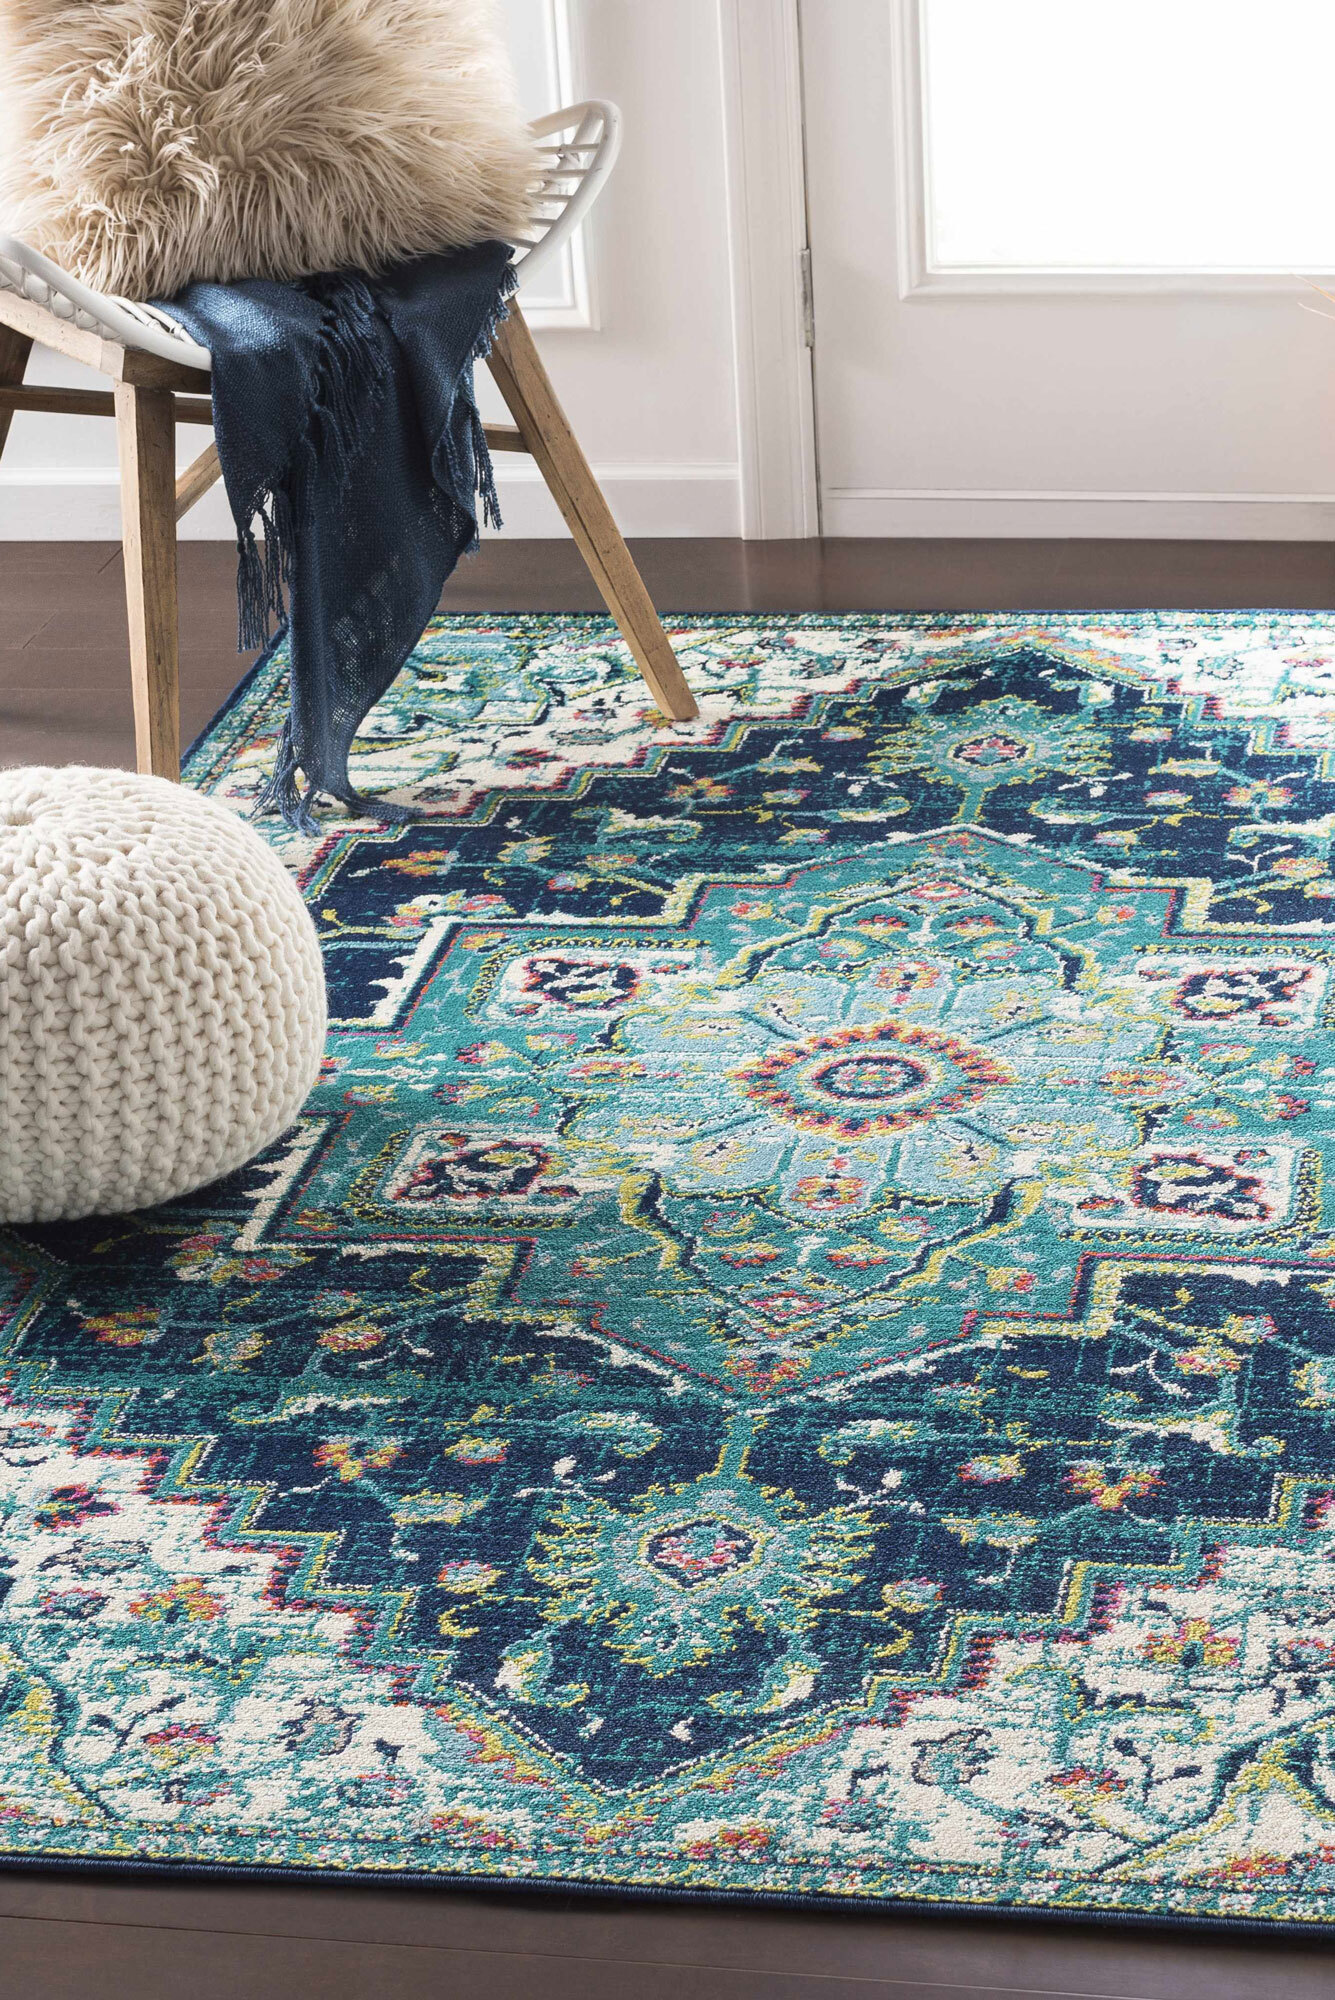 Space Traditional Medallion Rug(Size 270 x 180cm)